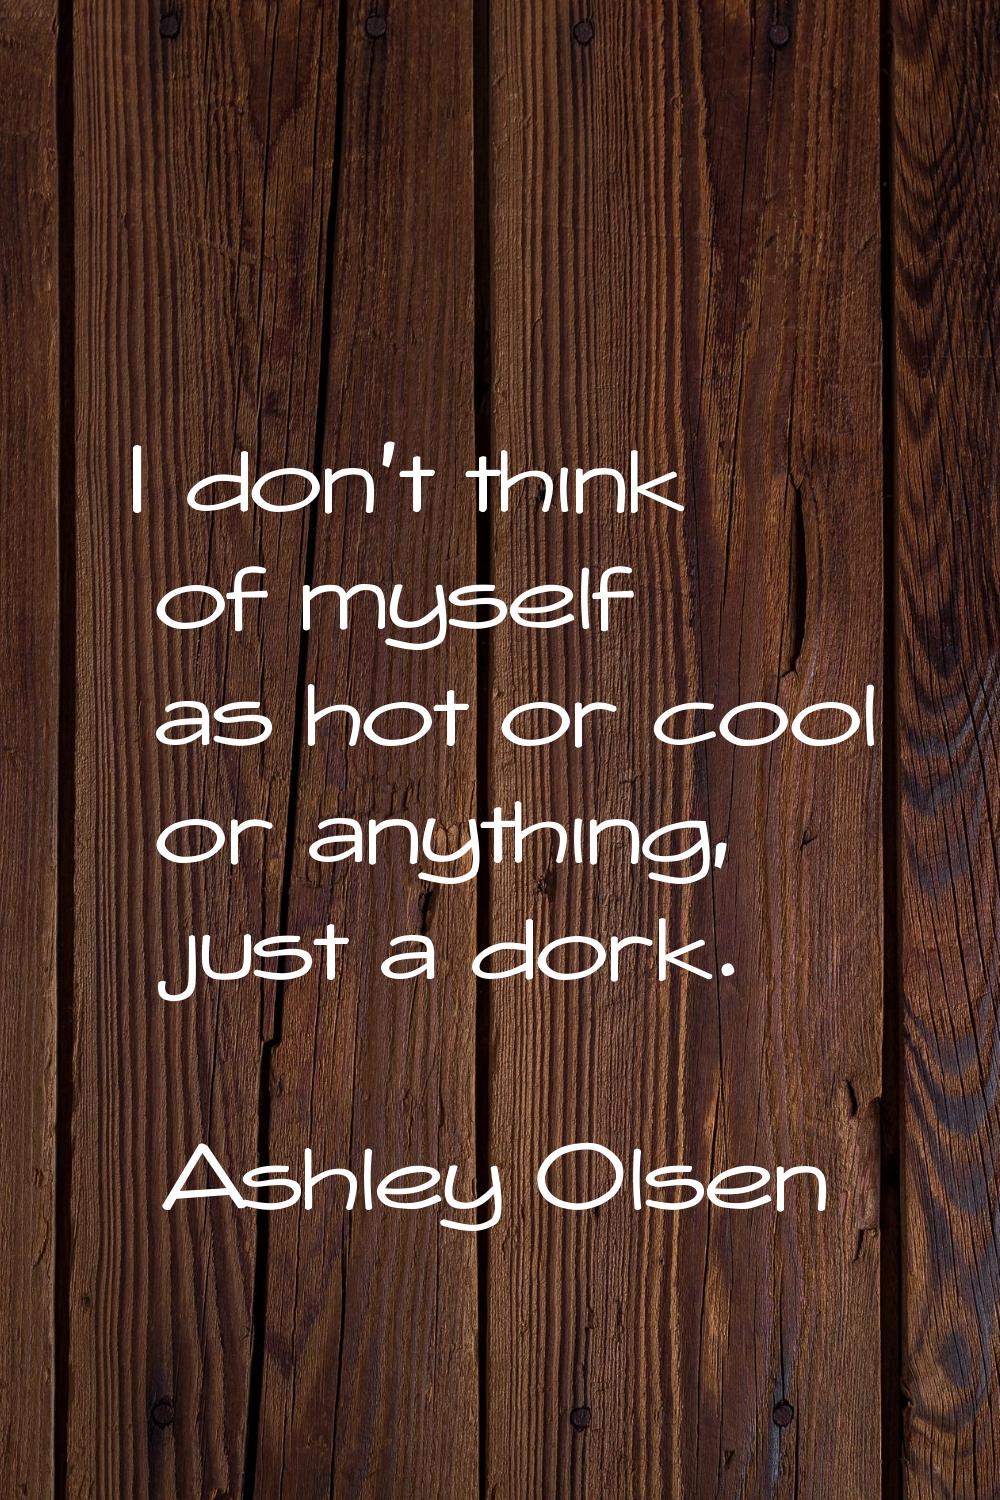 I don't think of myself as hot or cool or anything, just a dork.